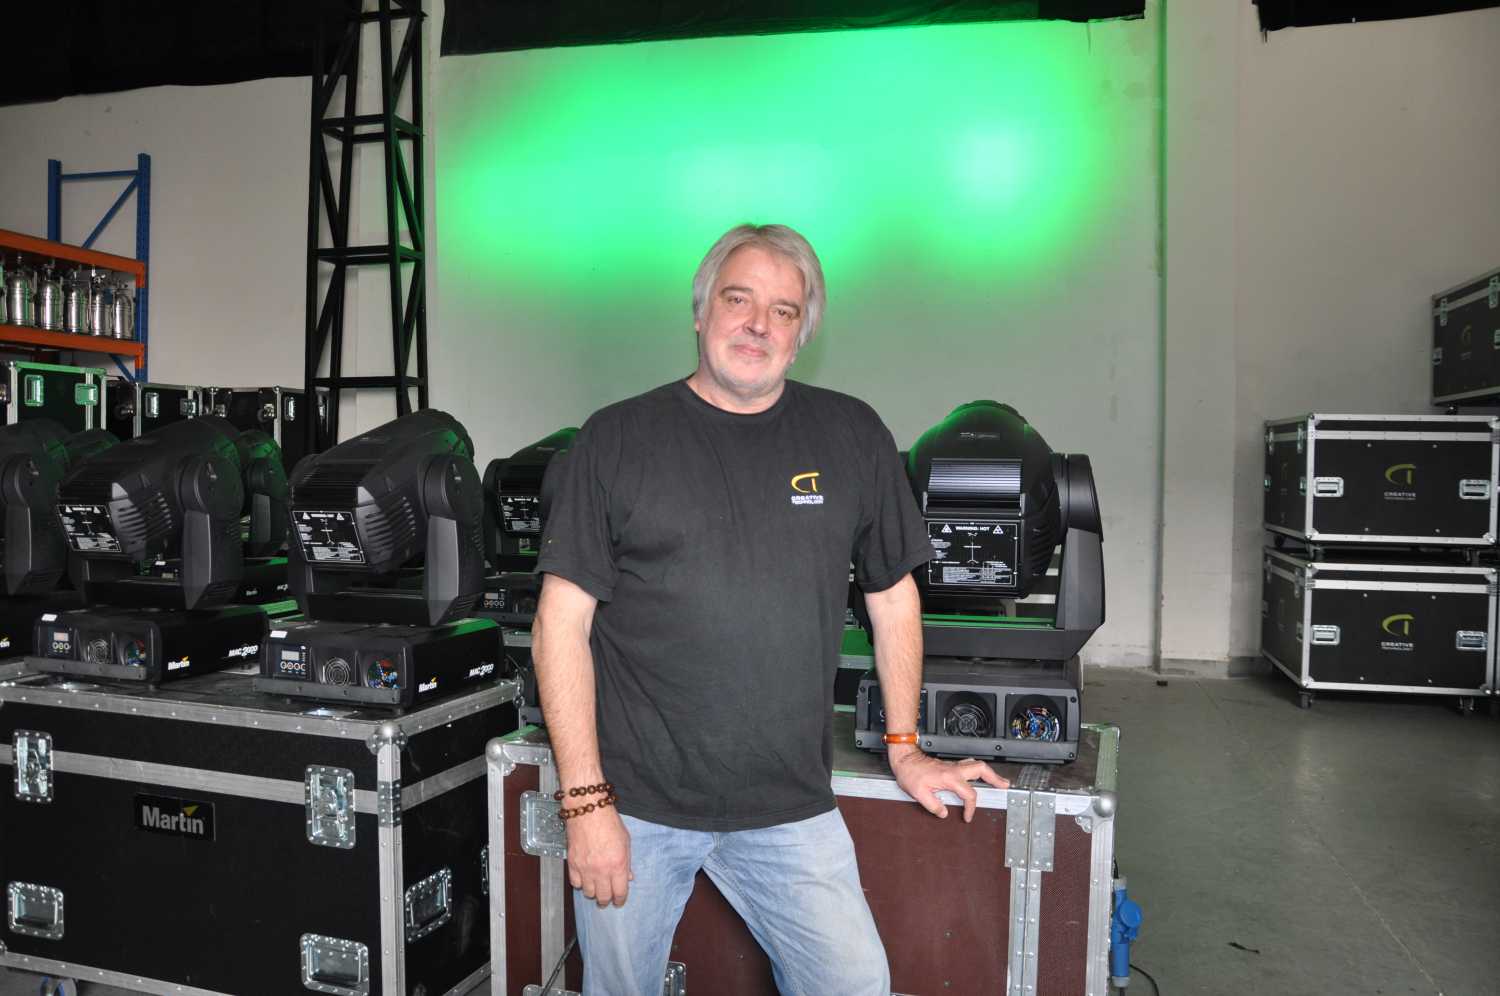 Simon Tibble’s career in the event industry spanned 40 years